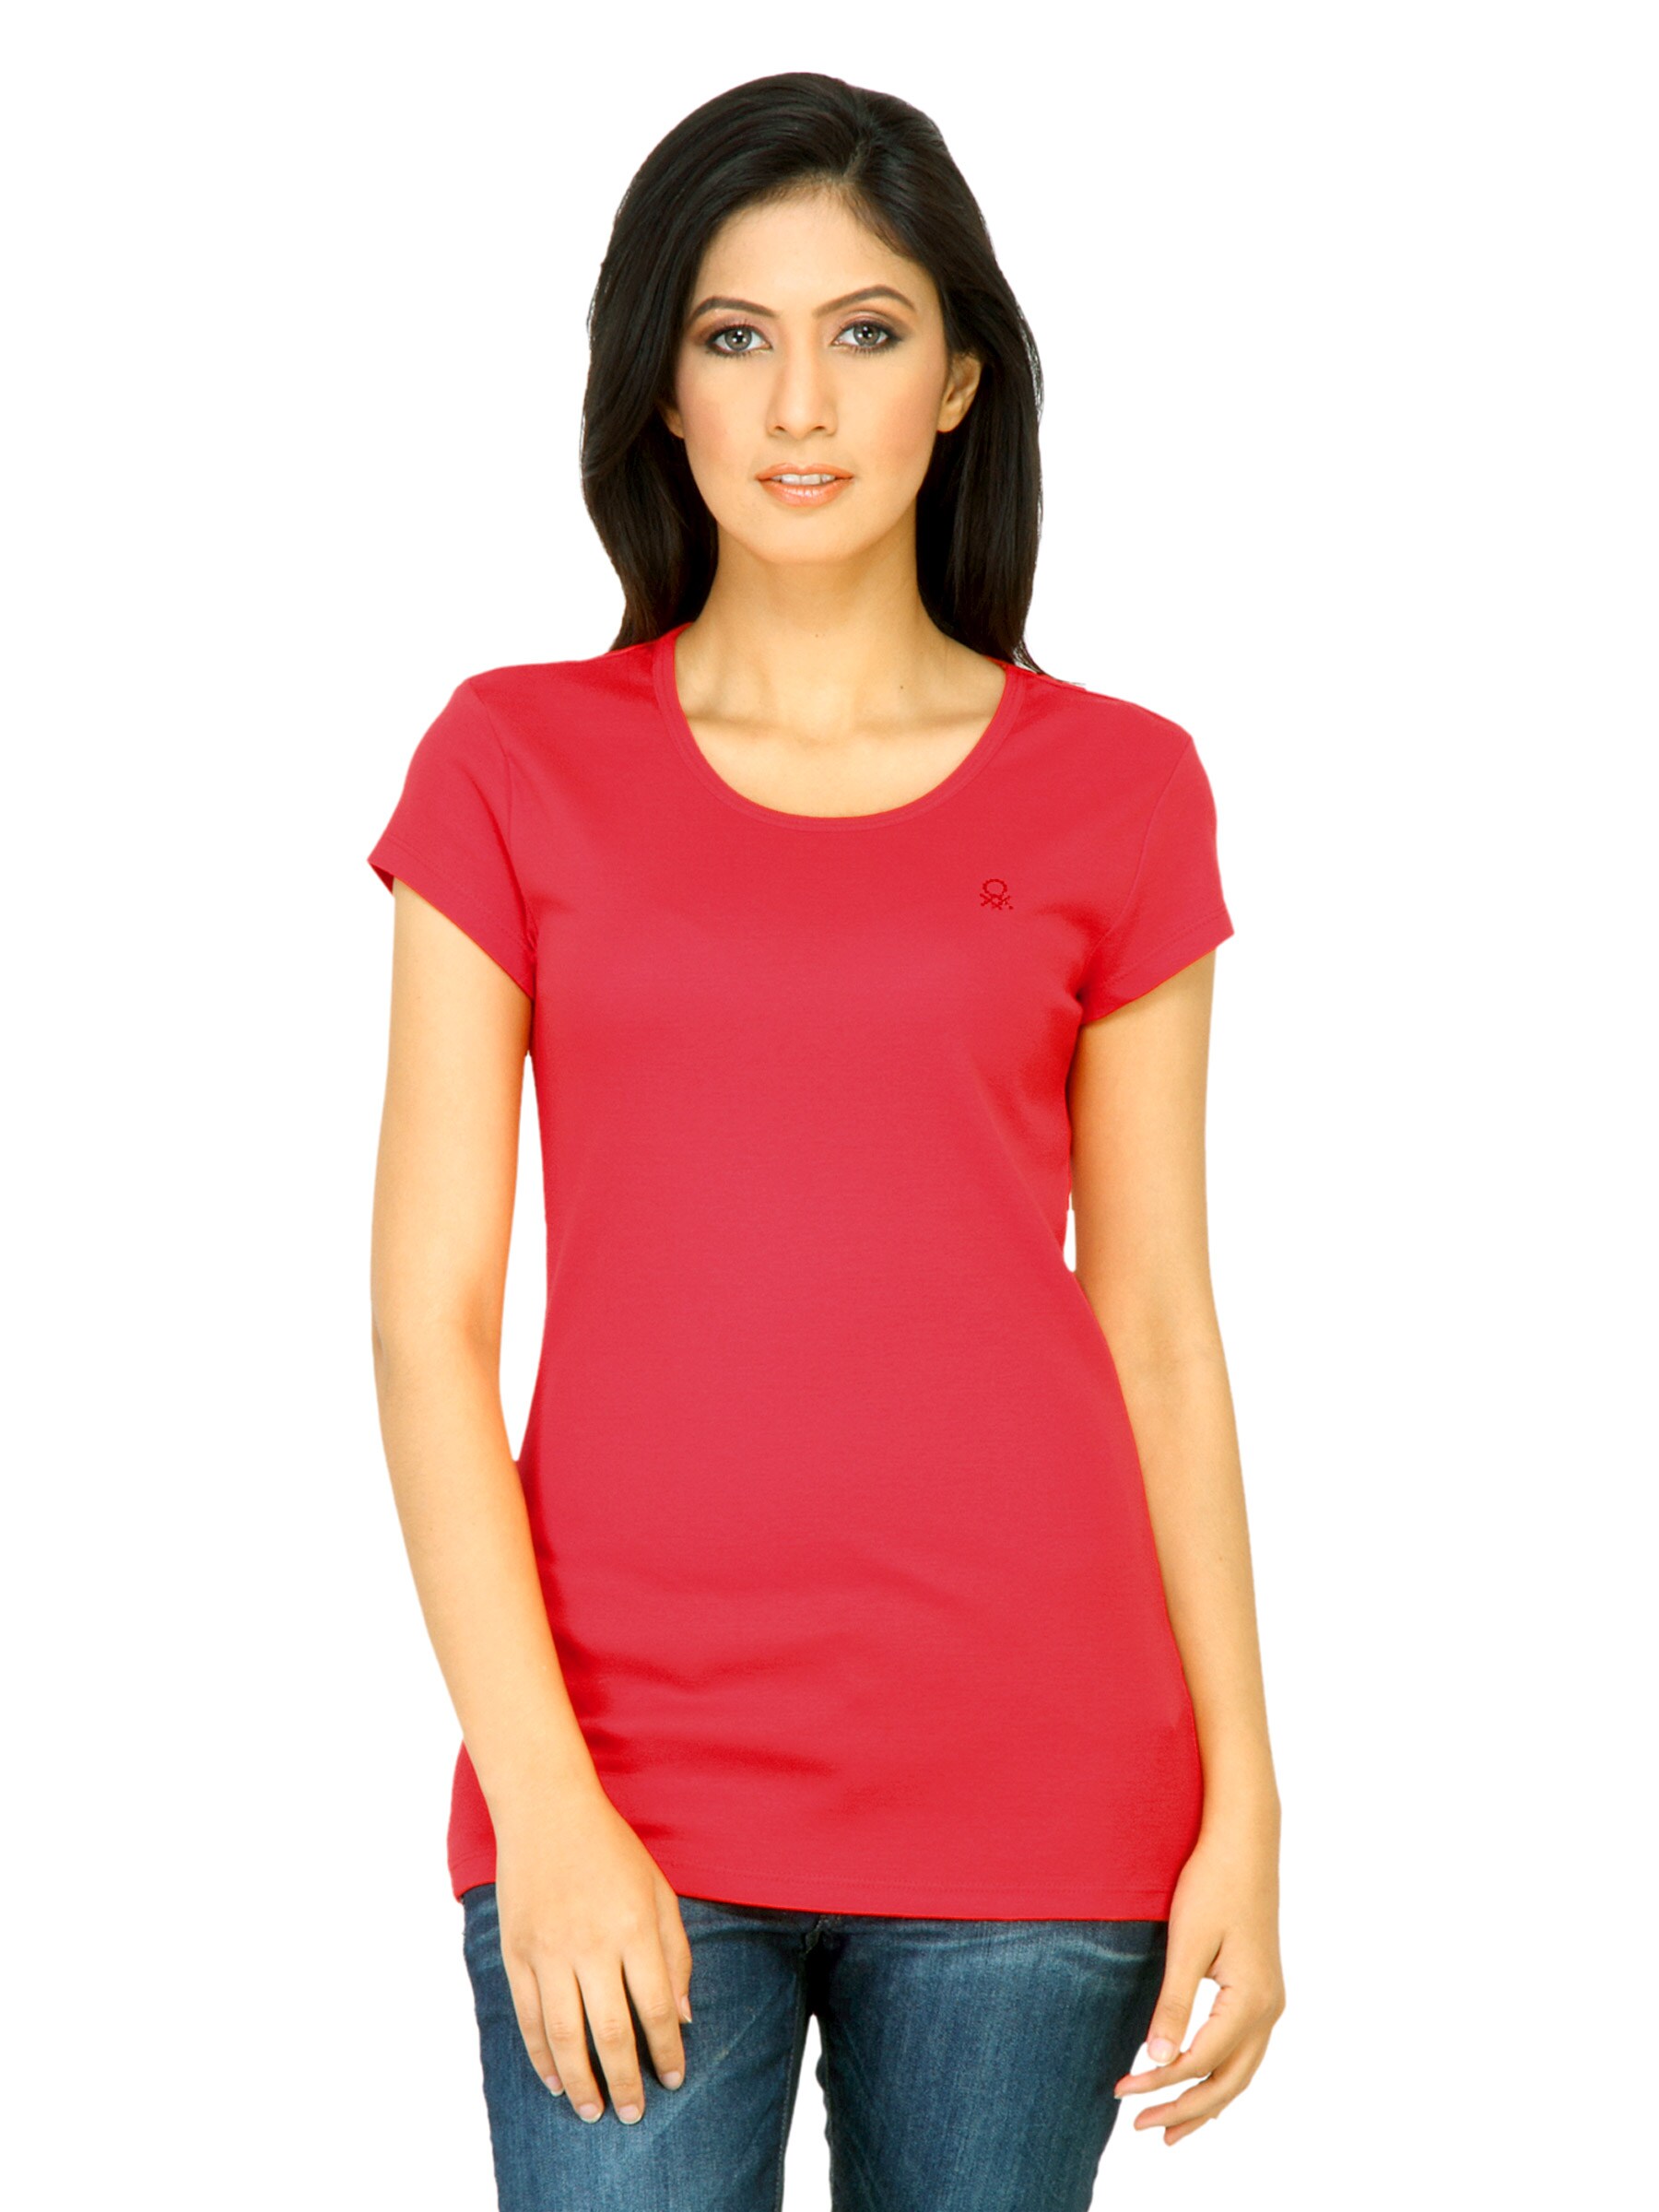 United Colors of Benetton Women Solid Red Tops